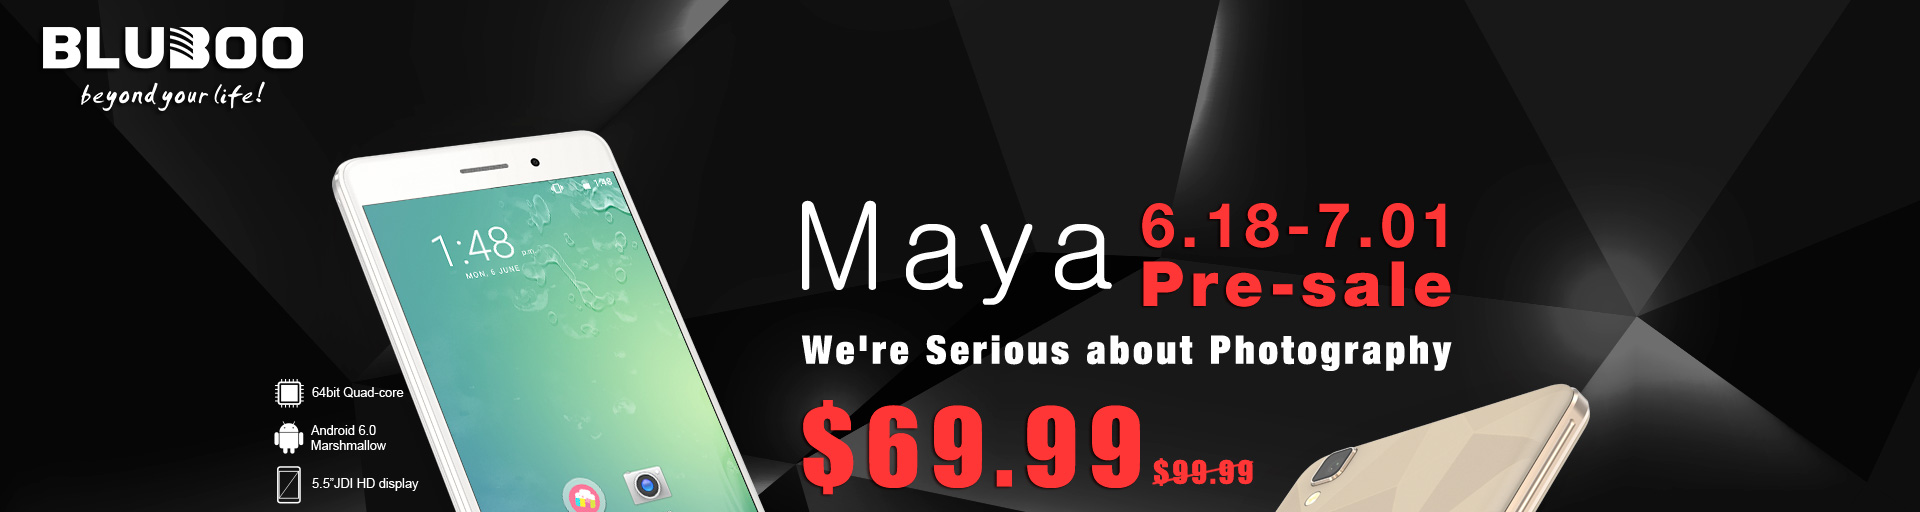 Maya 6.18-7.01 Pre-sale We're Serious about Photography $69.99